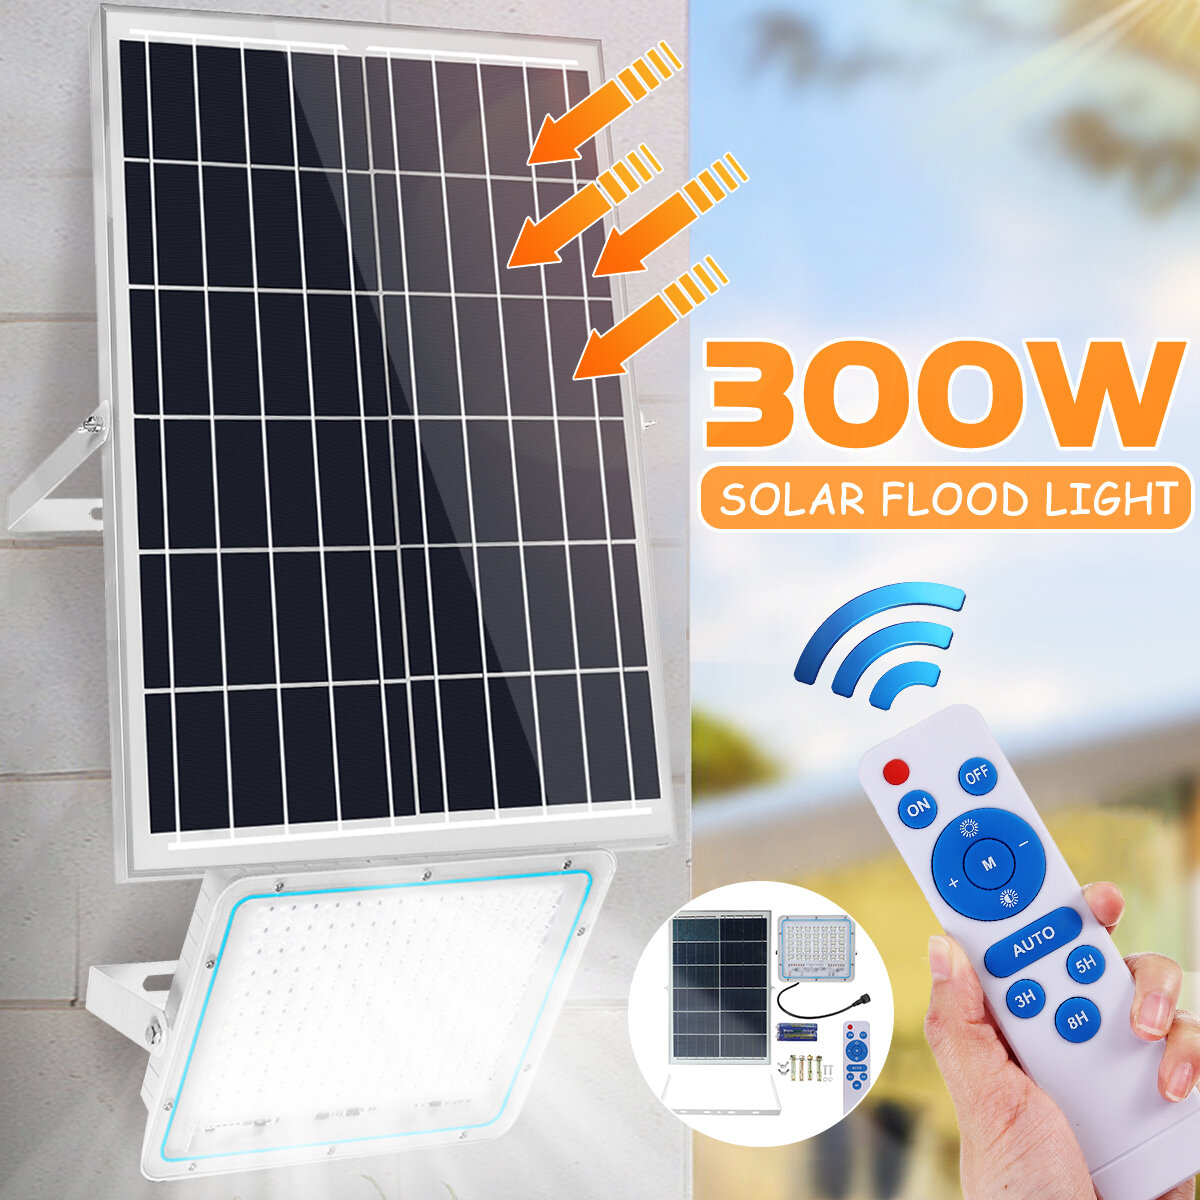 Image of 300W 300LED 5000LM Solar Powered Flood Light Remote Control Light Sensor Timing Outdoor Waterproof IP65